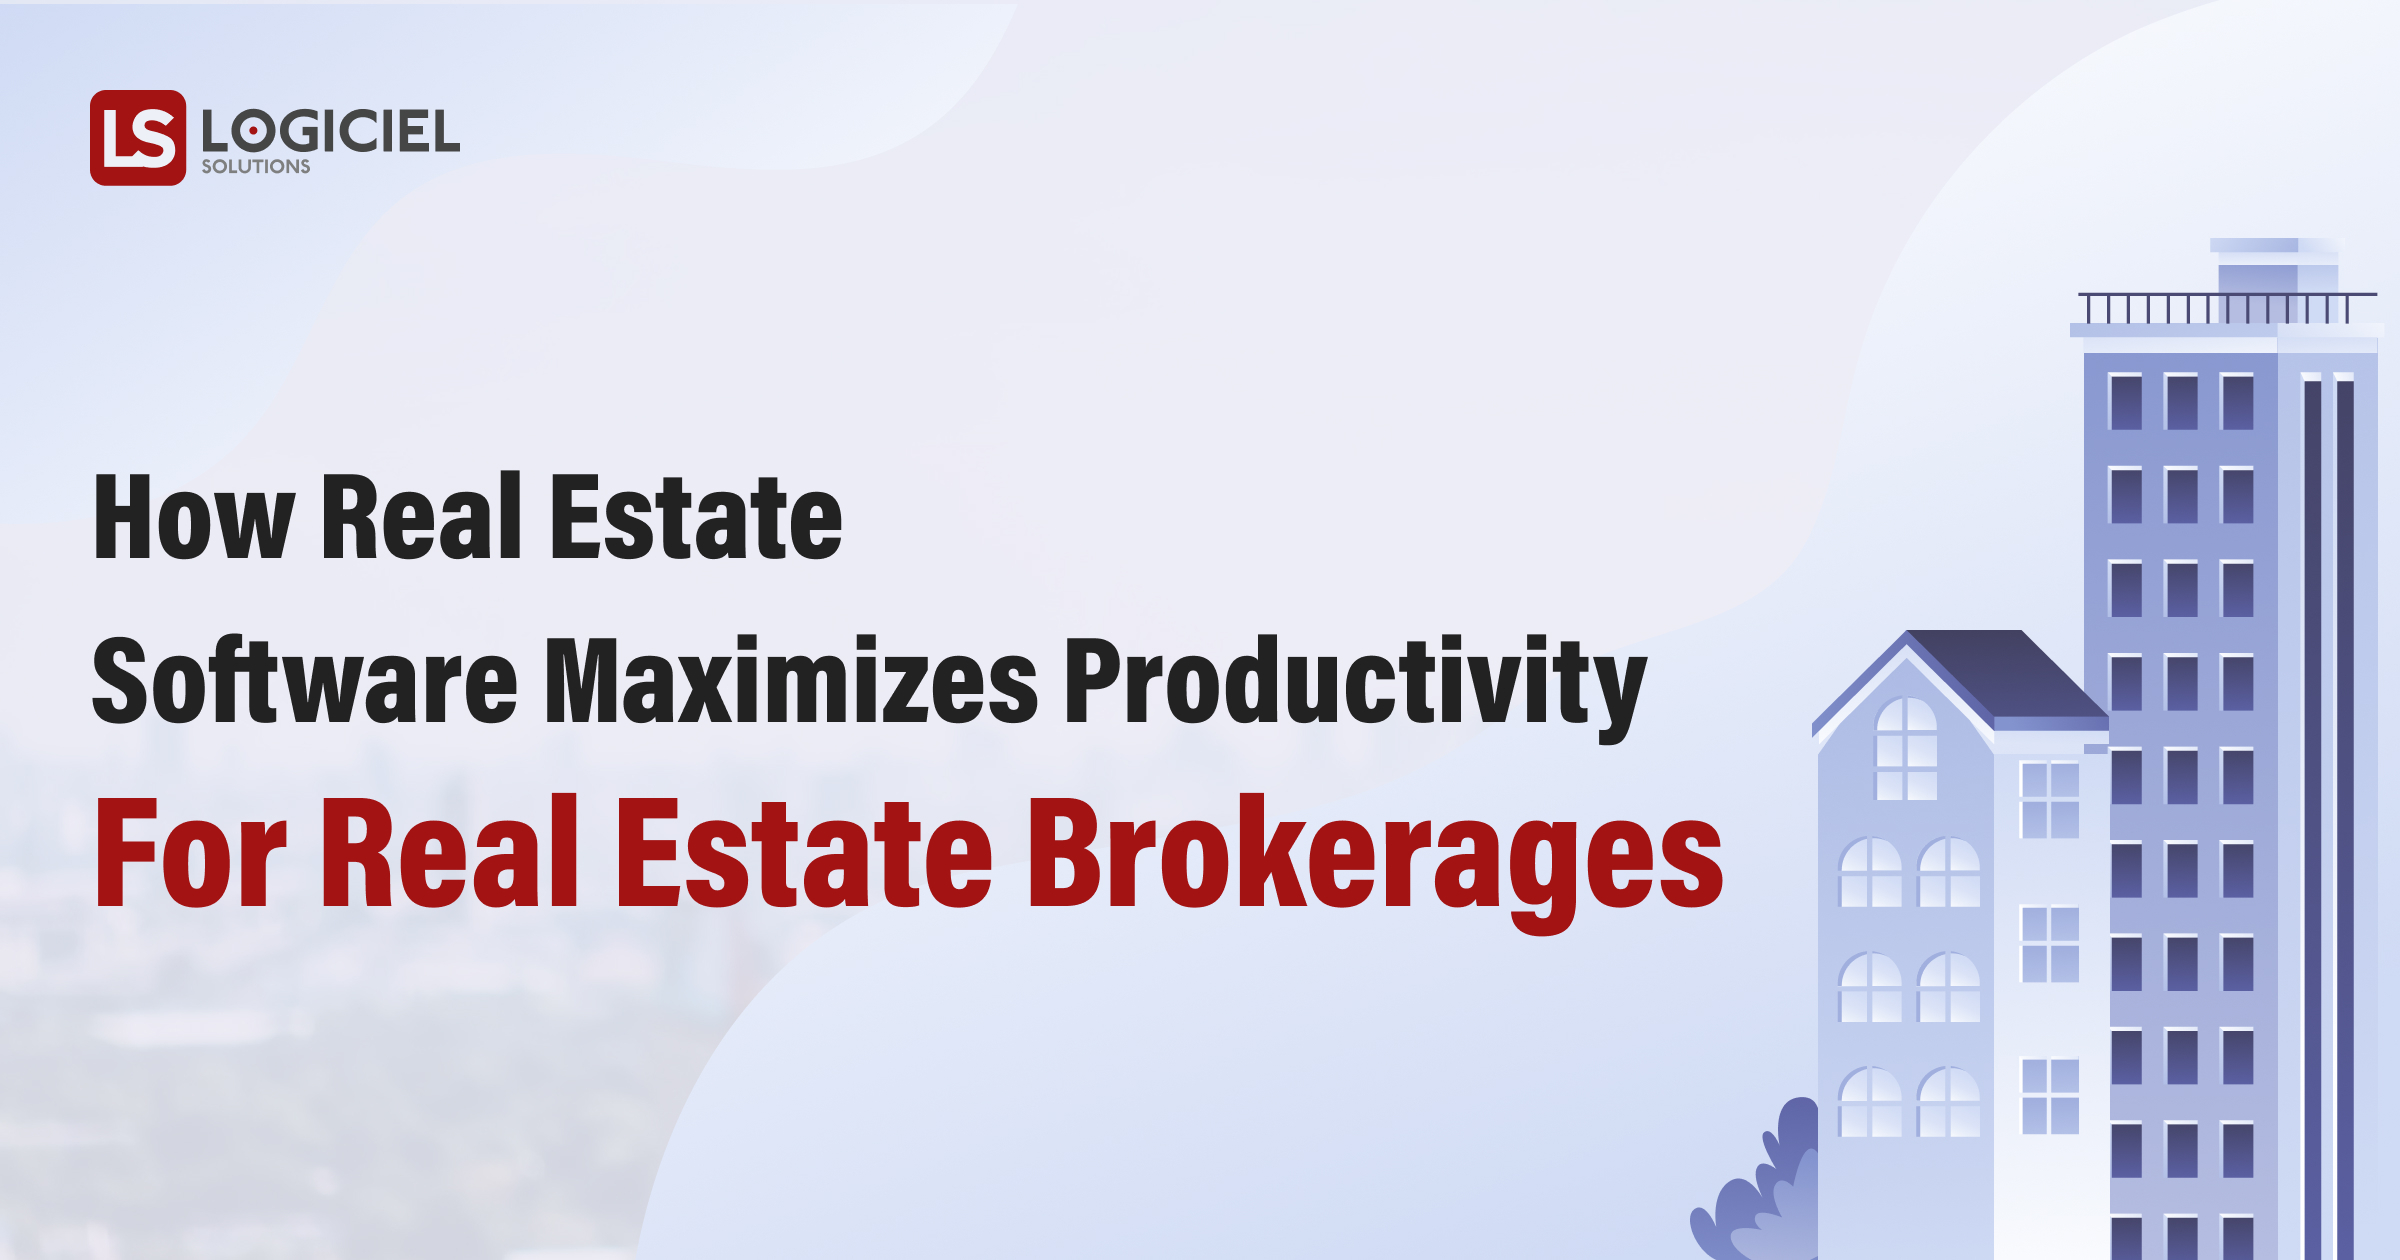 How Real Estate Software Maximizes Productivity for Real Estate Brokerages